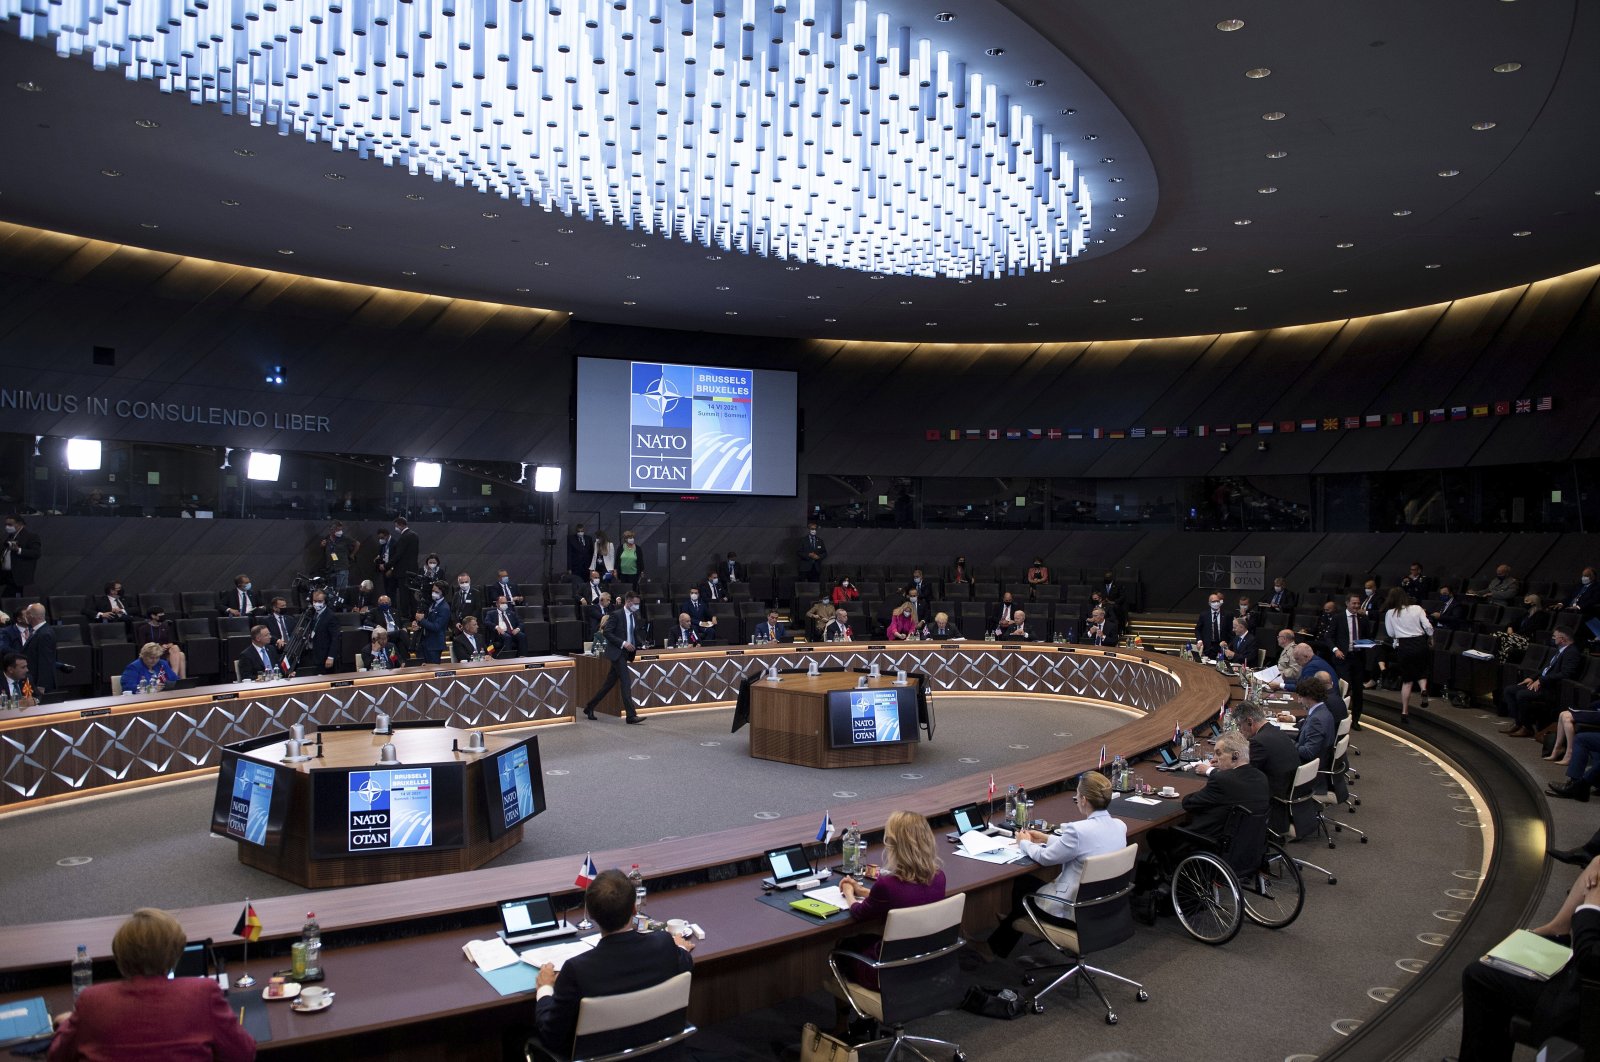 NATO leaders attend a plenary session during a NATO summit at NATO headquarters in Brussels, June 14, 2021. (AP Photo)